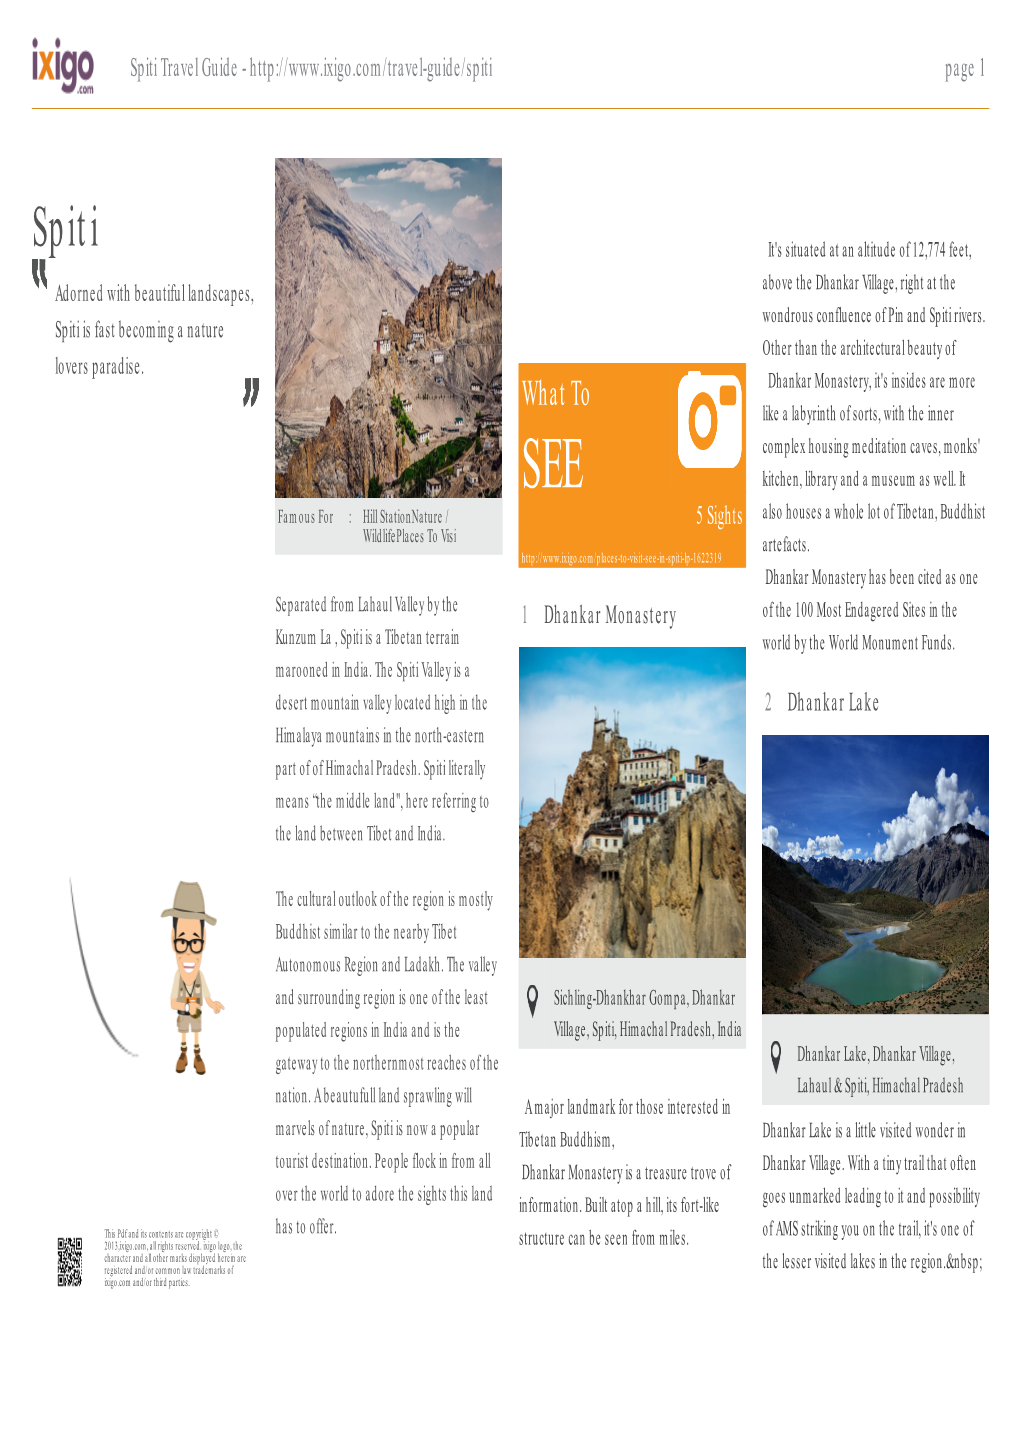 Spiti Travel Guide - Page 1